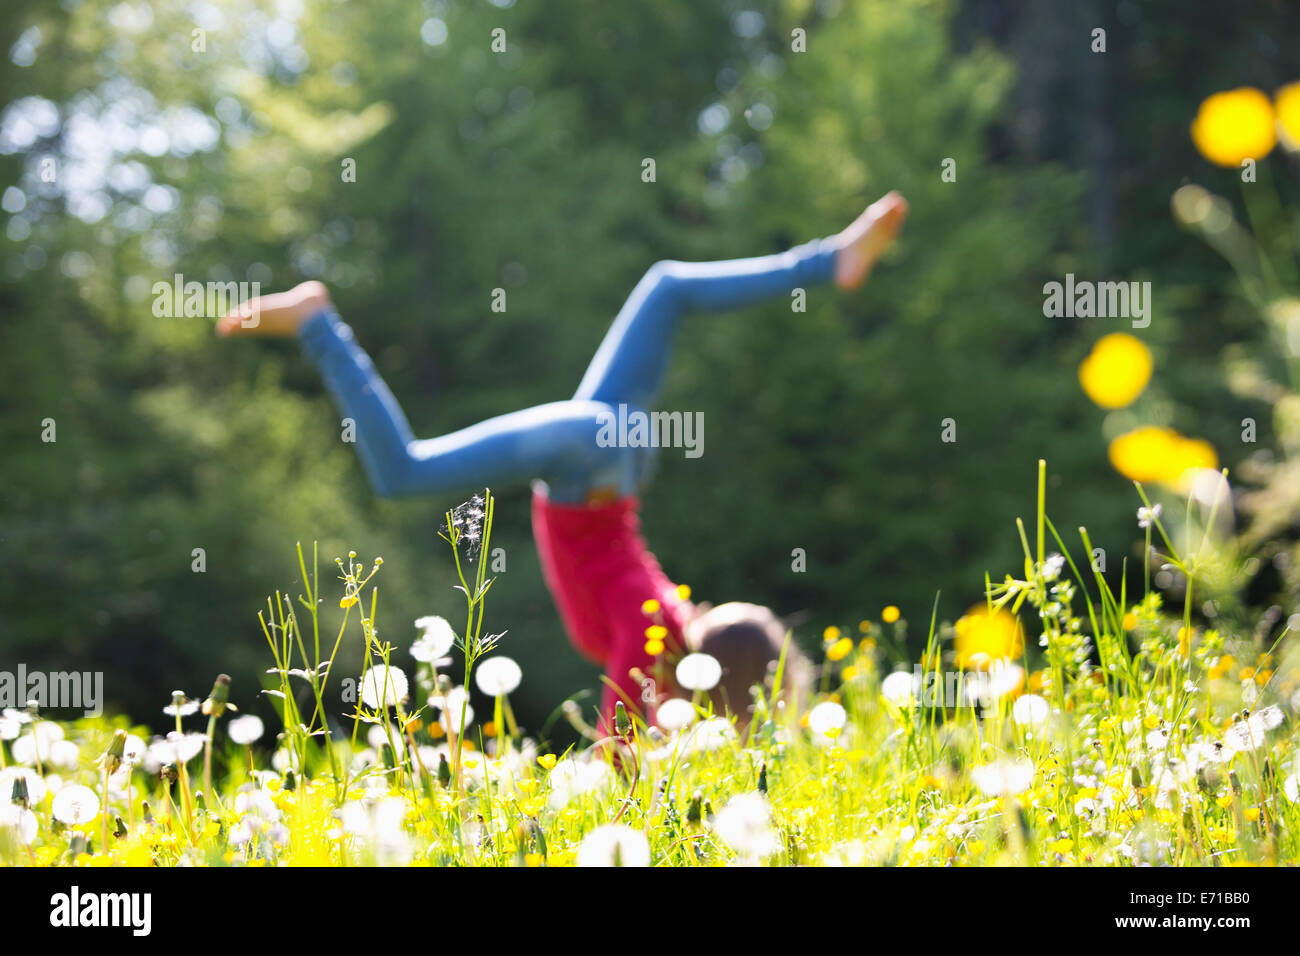 Teenage girl doing handstand on a flower meadow Stock Photo